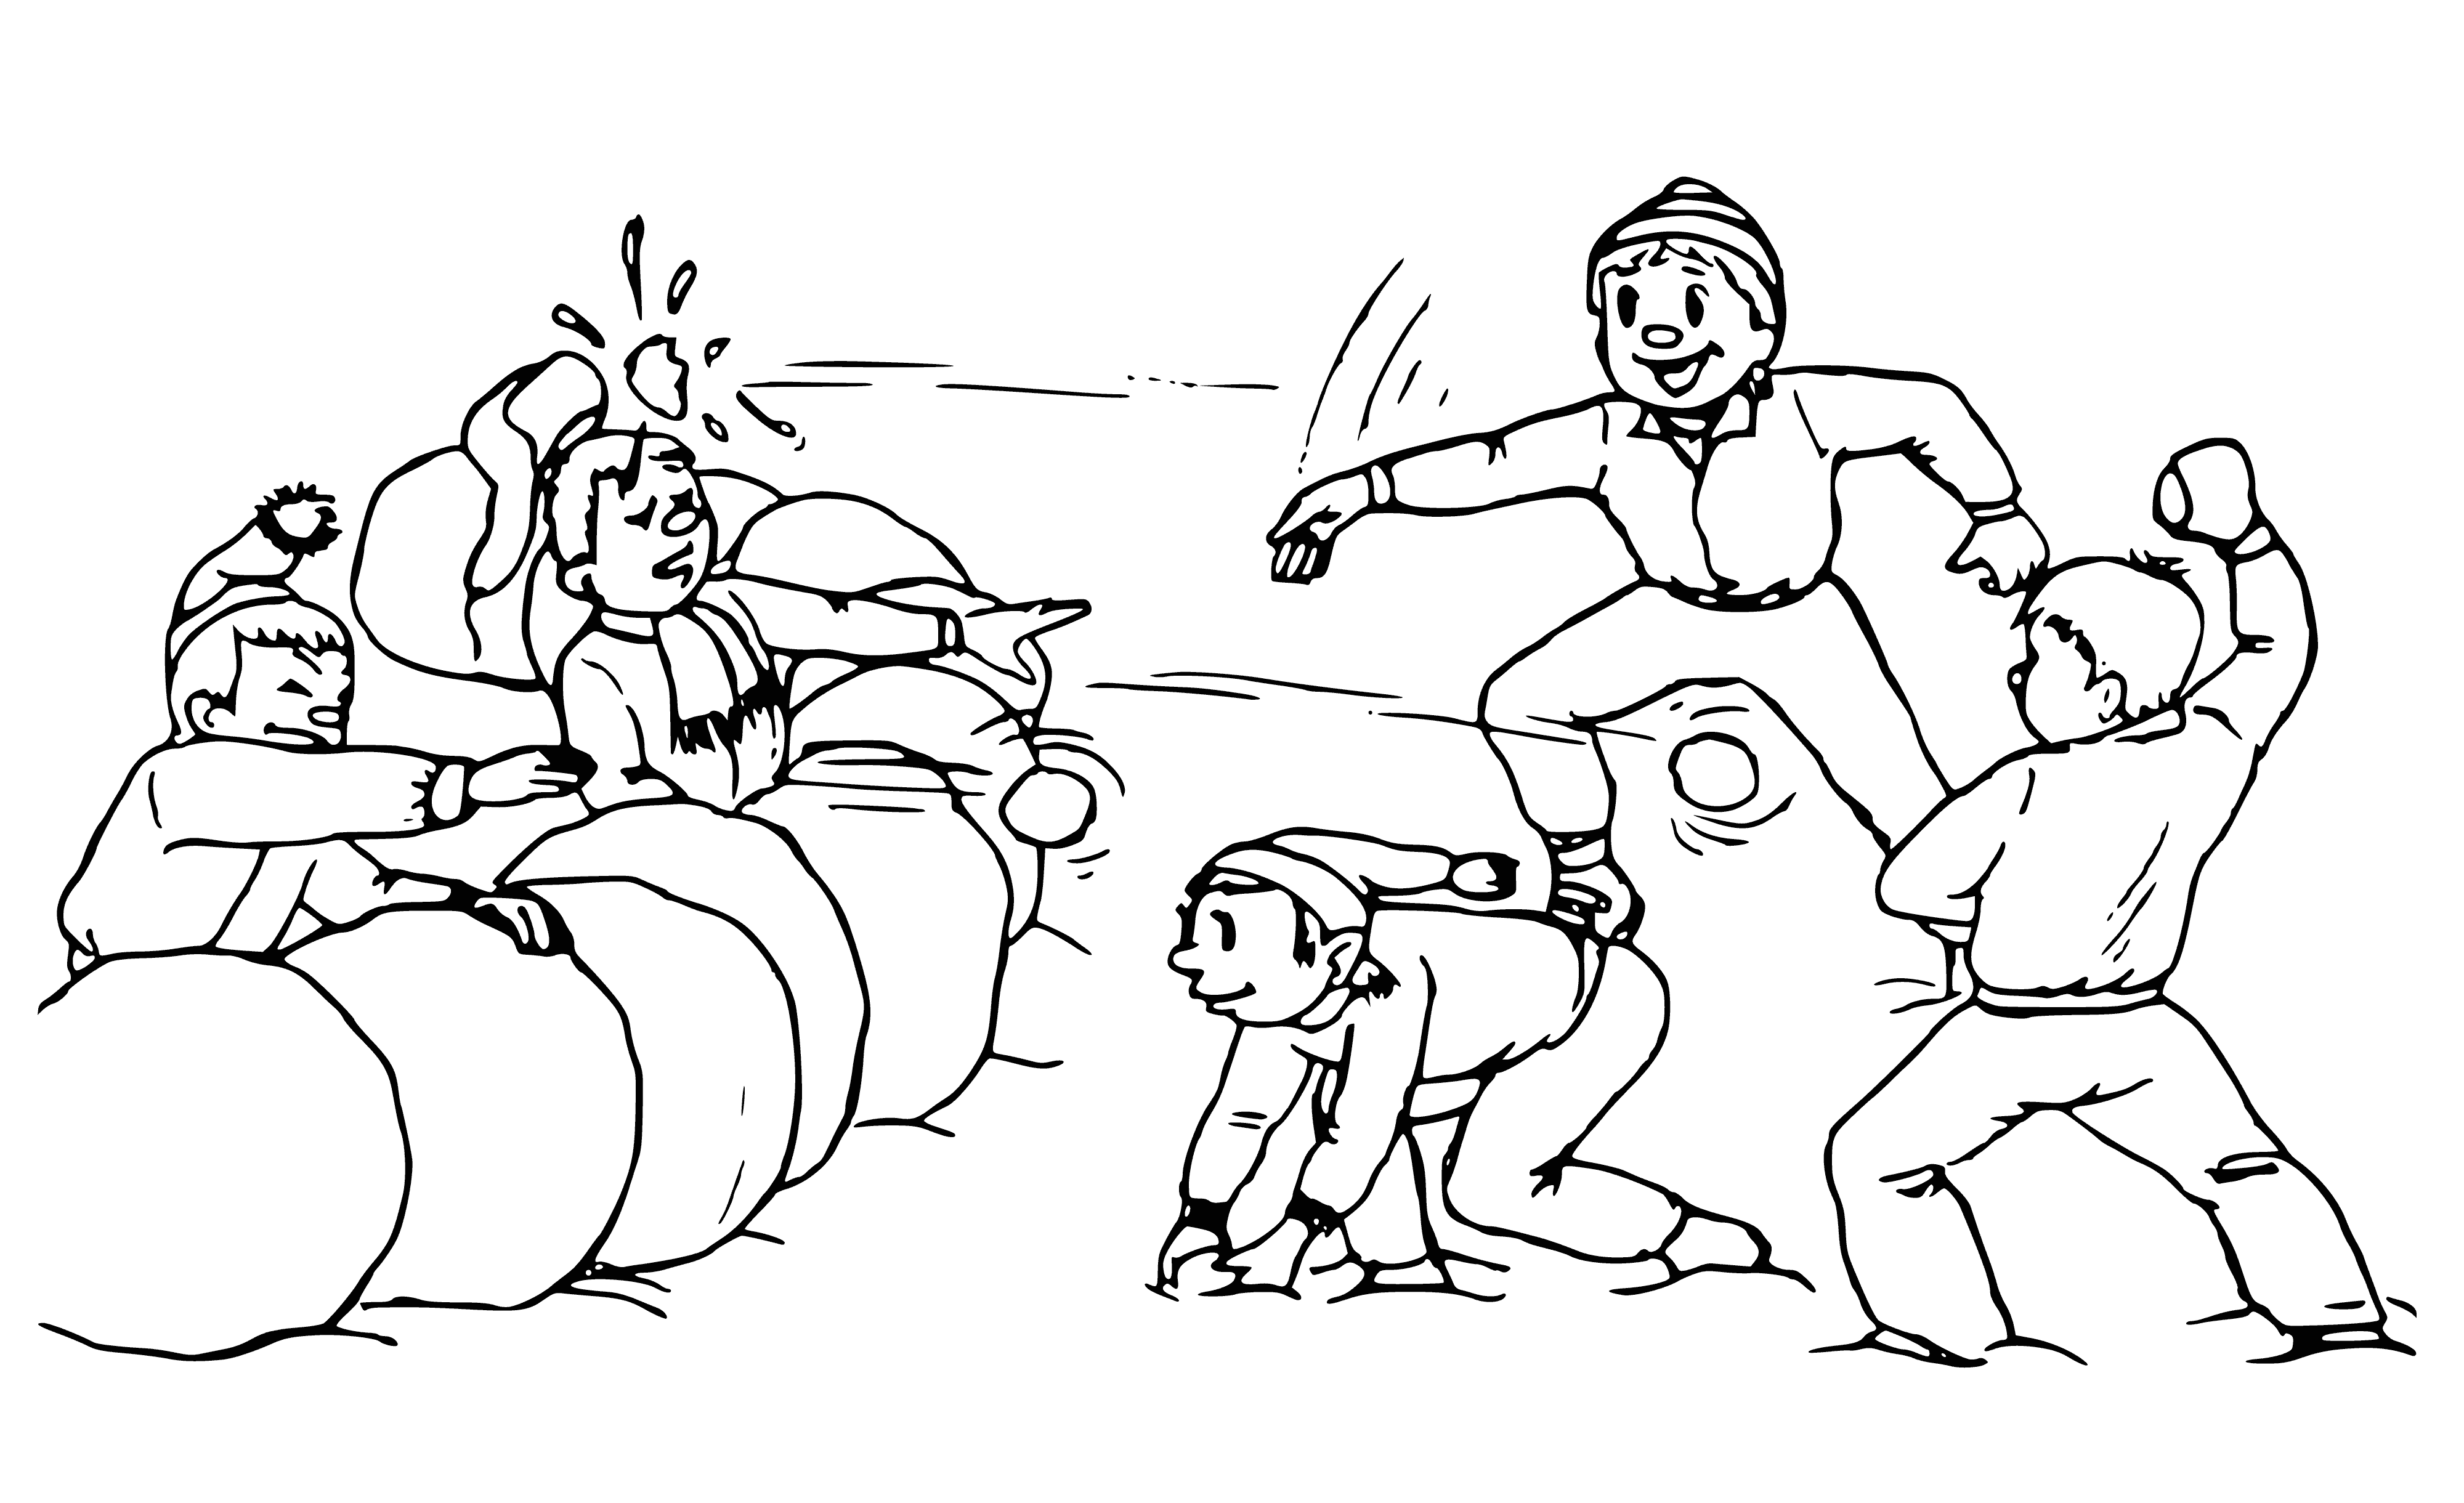 Snow fight coloring page